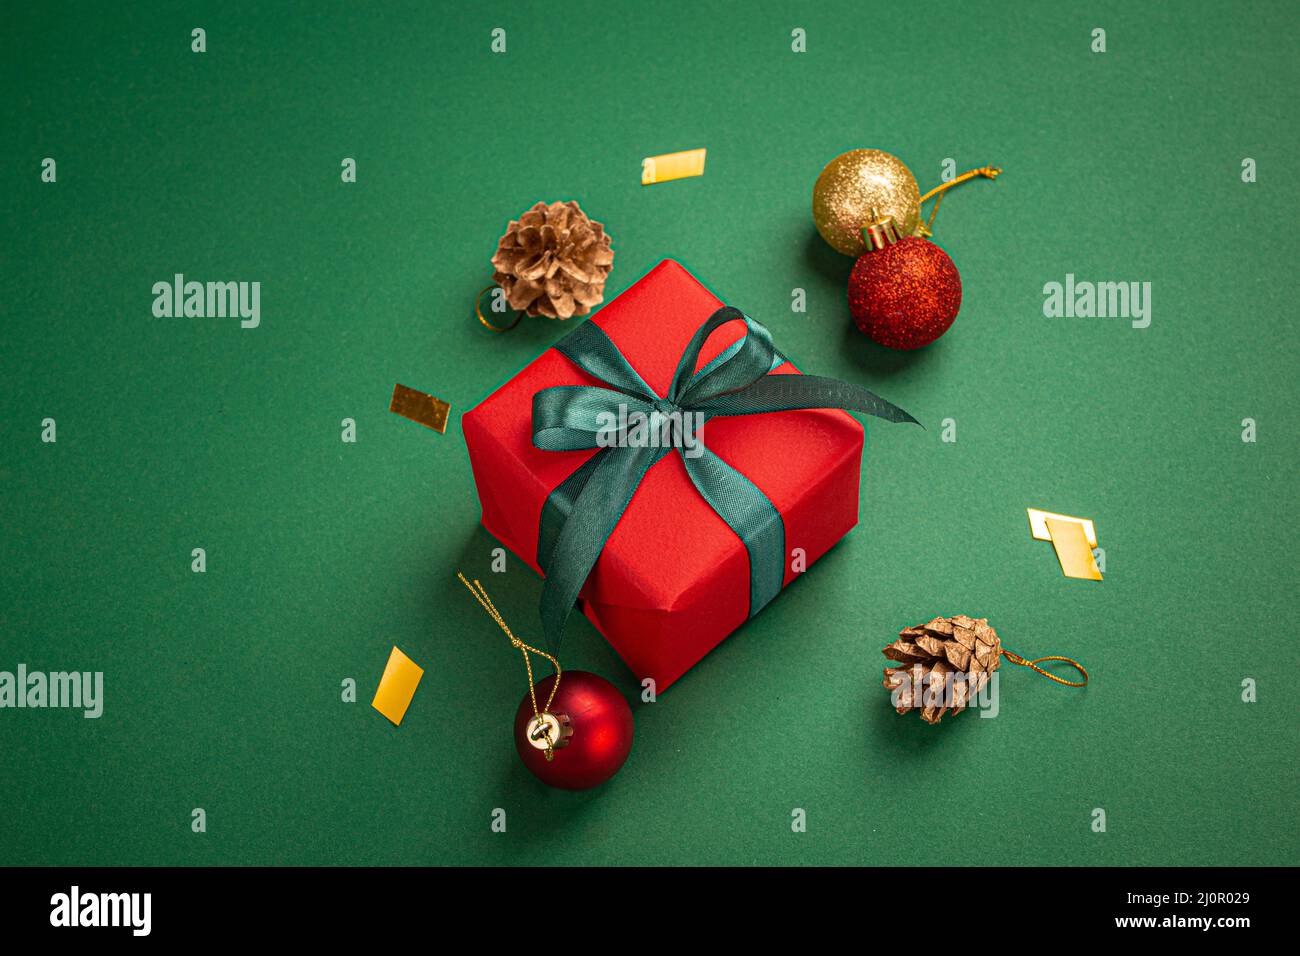 Christmas composition with present and decorations in red, green, golden colors Stock Photo